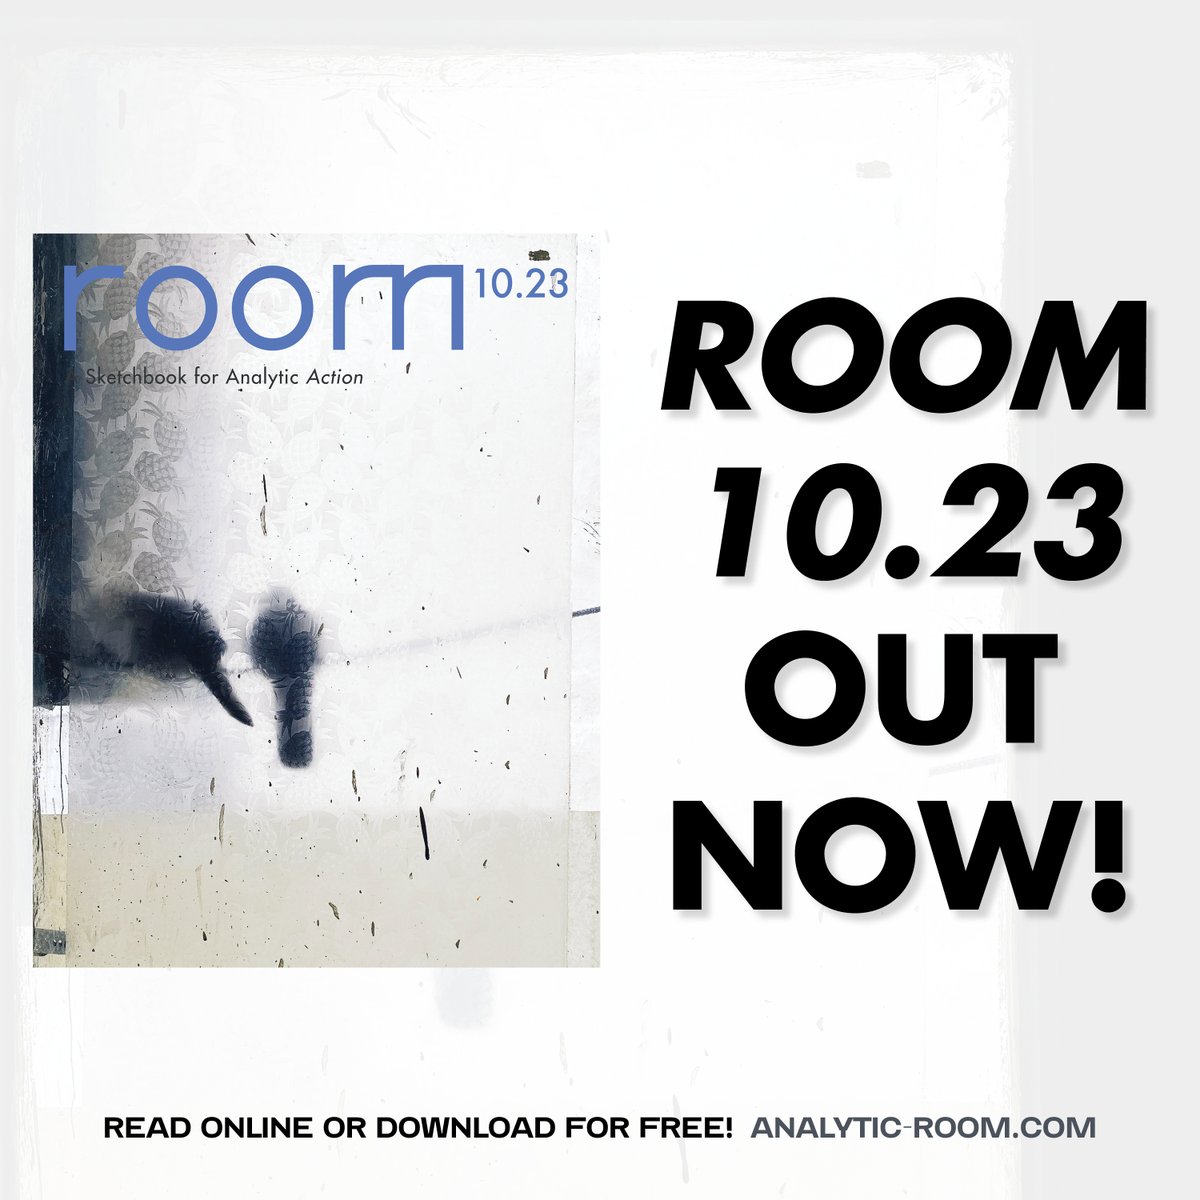 ROOM 10.23 is out now! Download or read it online at analytic-room.com!

#analyticroom #psychoanalysis #art #poetry #communityprojects #mentalhealth